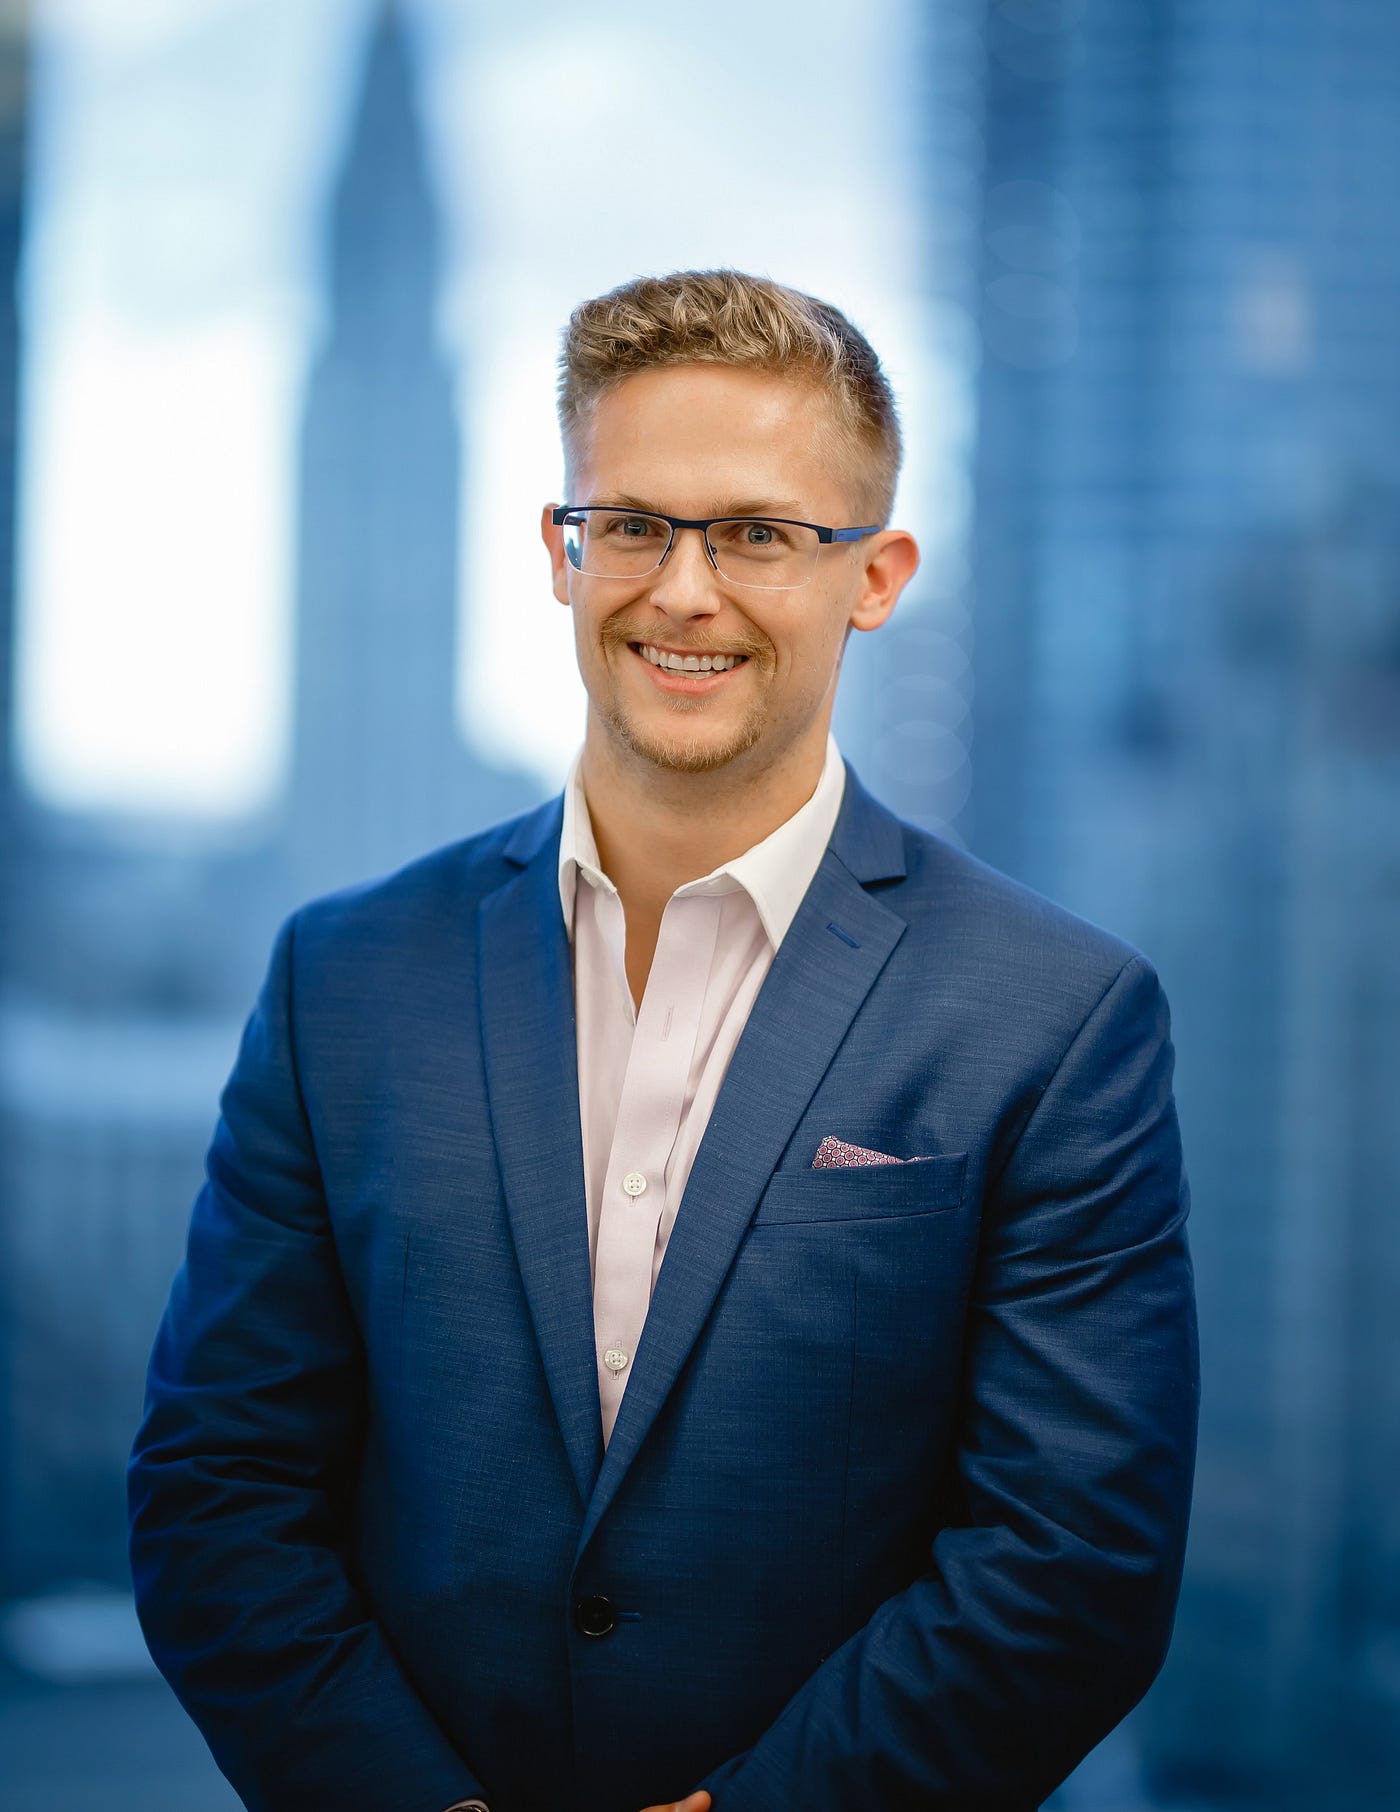 Alex Dripchak of Commence: How to Be Great at Sales Without Seeming Salesy | by Tyler Gallagher | Authority Magazine | Medium